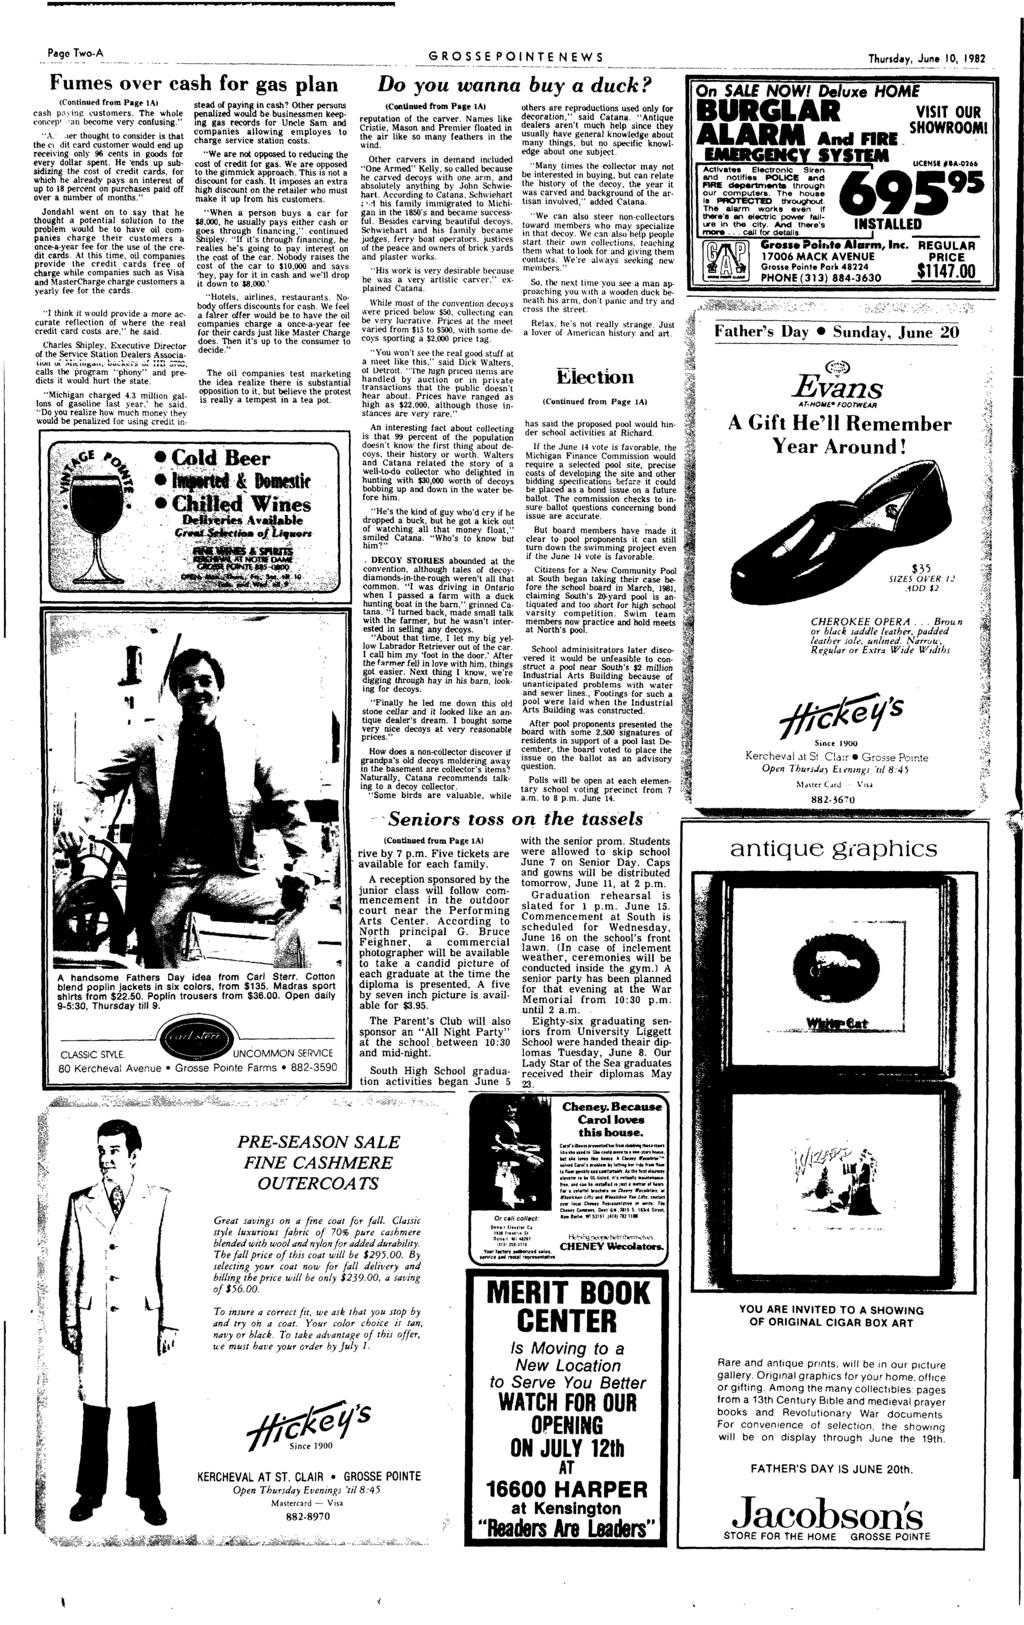 Page Two-A GROSSE PONTE NEWS Thursday June 10 1982 ----------- ------------ -- - - - -------- - ---------- ------ --------_ - --------- -------- - - ---------- ------ -_- Fumes over cash for gas plan